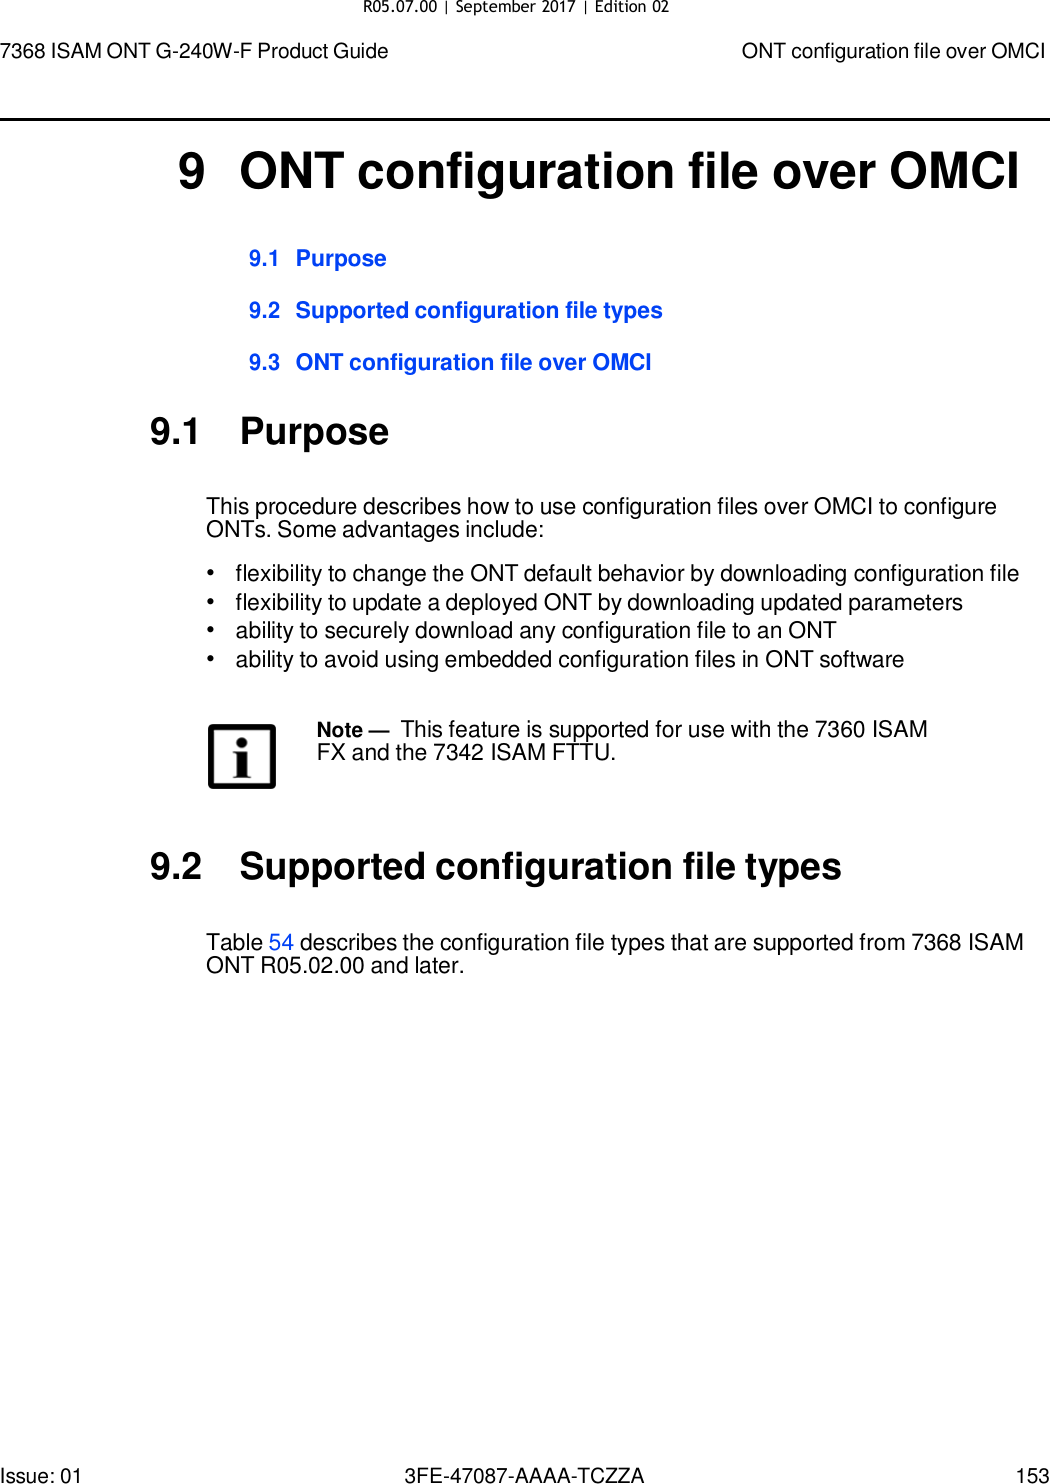 Page 147 of Nokia Bell G240WFV2 7368 ISAM GPON ONU User Manual 7368 ISAM ONT G 240W F Product Guide